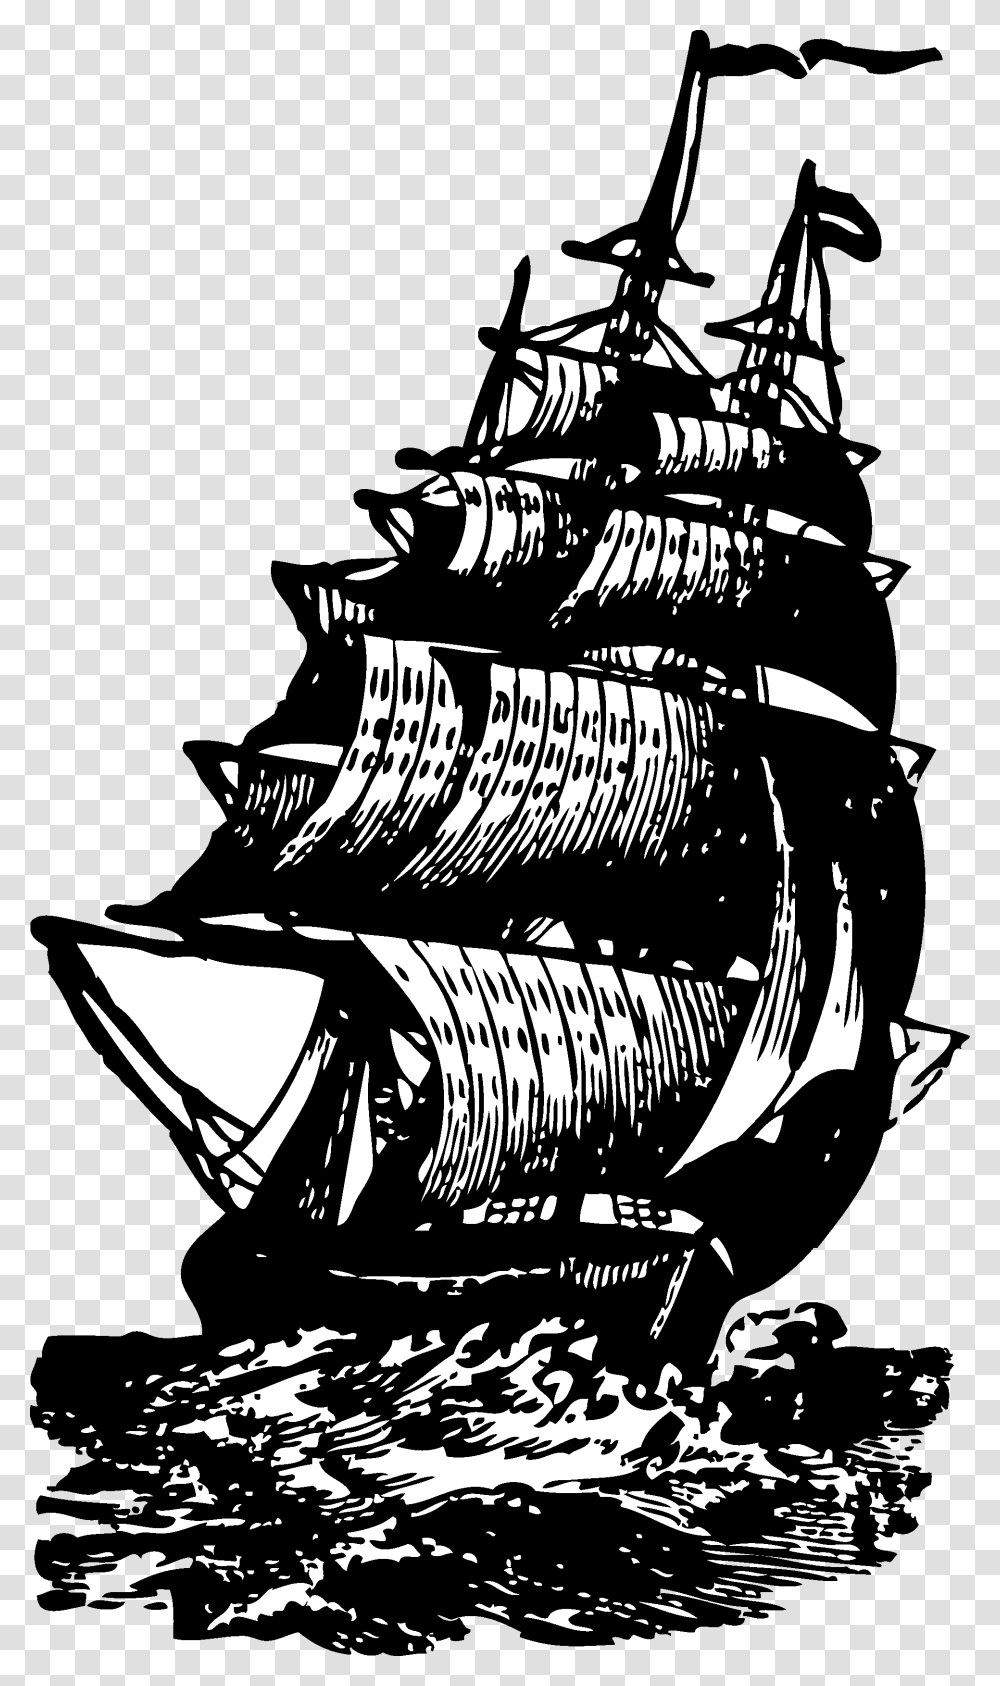 Vintage Brig Ship Clip Art Free Clip Art Senses Fail Rum Is For Drinking Not, Stencil, Drawing, Doodle Transparent Png